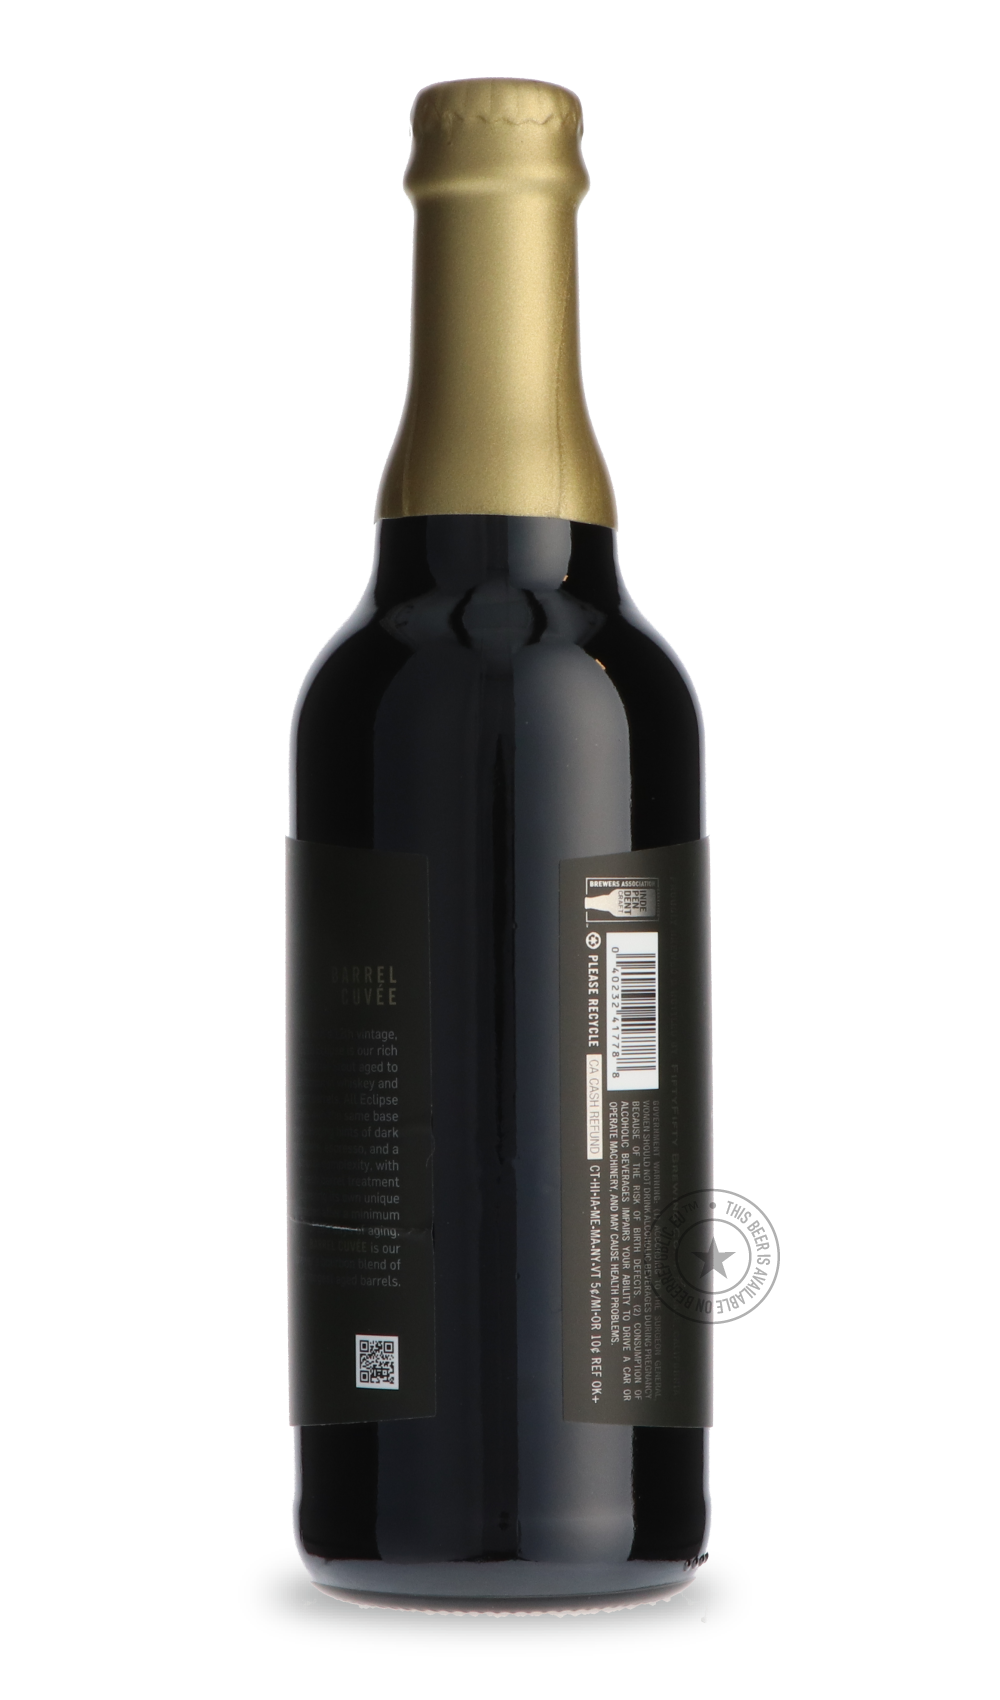 -FiftyFifty- Eclipse - Barrel Cuvée (2019)-Stout & Porter- Only @ Beer Republic - The best online beer store for American & Canadian craft beer - Buy beer online from the USA and Canada - Bier online kopen - Amerikaans bier kopen - Craft beer store - Craft beer kopen - Amerikanisch bier kaufen - Bier online kaufen - Acheter biere online - IPA - Stout - Porter - New England IPA - Hazy IPA - Imperial Stout - Barrel Aged - Barrel Aged Imperial Stout - Brown - Dark beer - Blond - Blonde - Pilsner - Lager - Whea